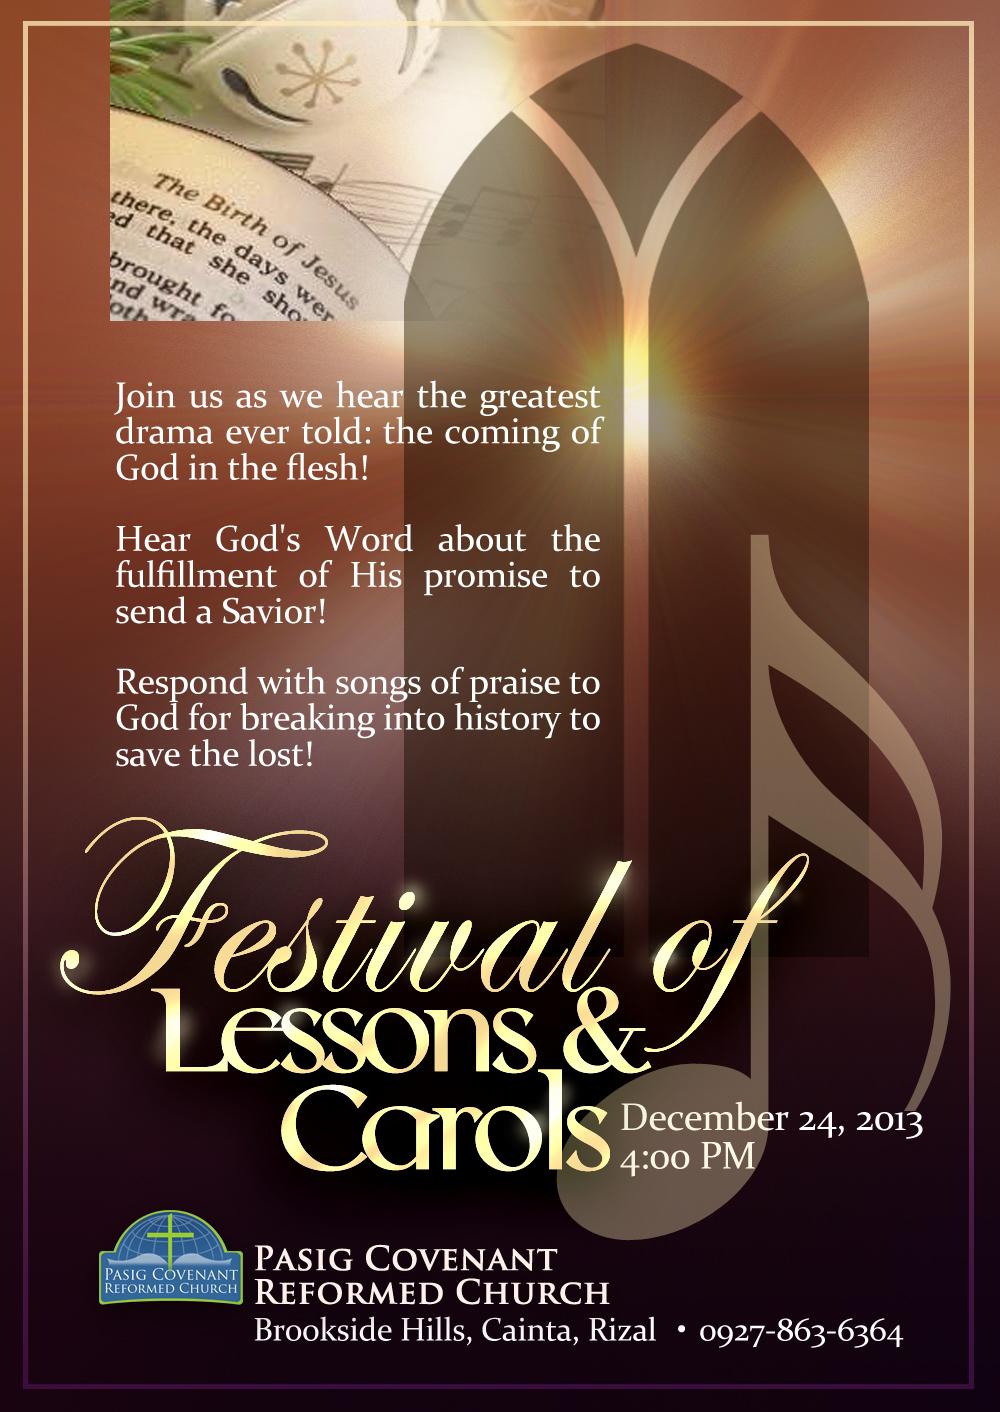 About Our Festival of Lessons & Carols Welcome to our annual Festival of Scriptures & Songs service.